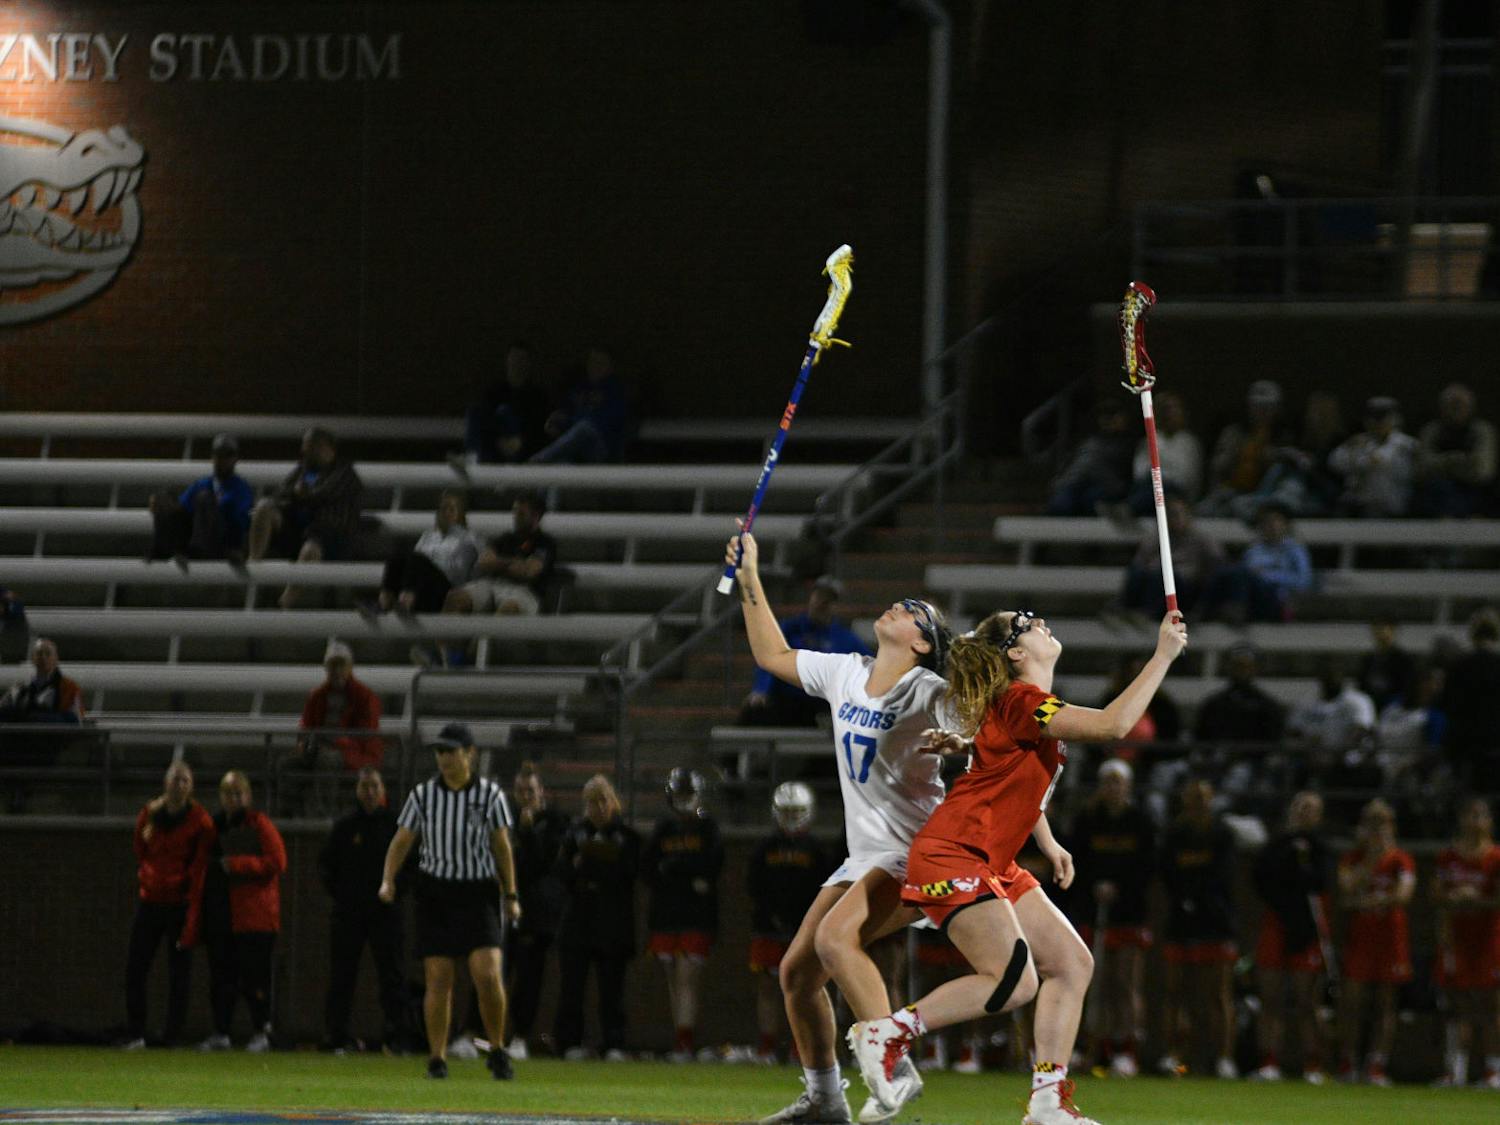 Florida midfielder Shannon Kavanagh (left) is second on the Gators with 24 draw controls this season and is the main option for the draw circle. “The draw circle is where the game is won and lost, for the most part,” coach Amanda O’Leary said.
&nbsp;